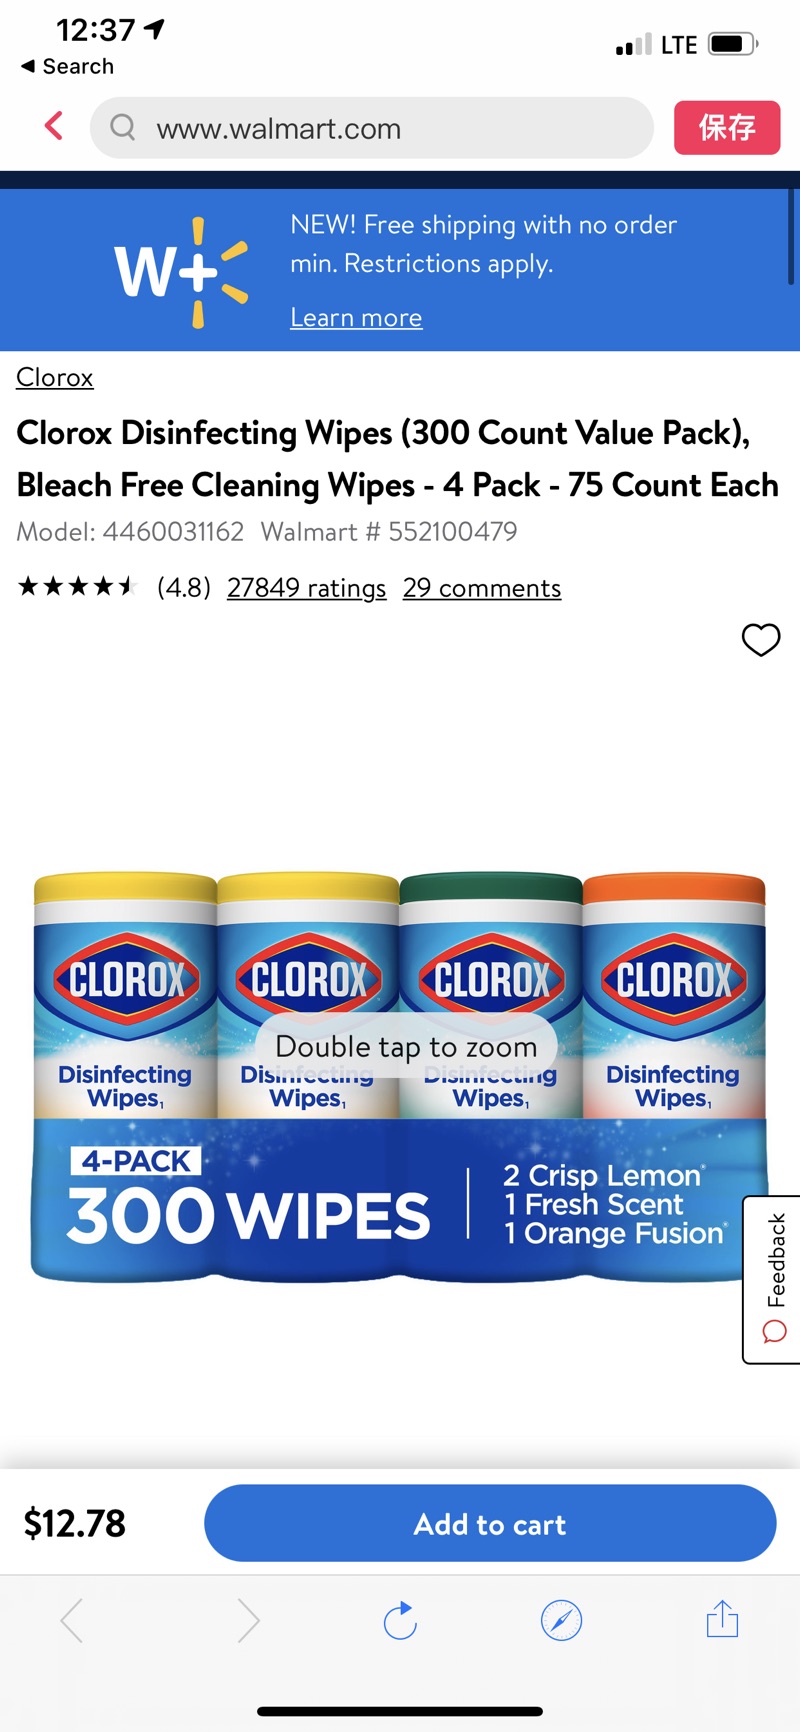 Zip code location请改成11211以后方可显示有货下单！Clorox 消毒湿巾四桶 Disinfecting Wipes (300 Count Value Pack), Bleach Free Cleaning Wipes - 4 Pack - 75 Count Each